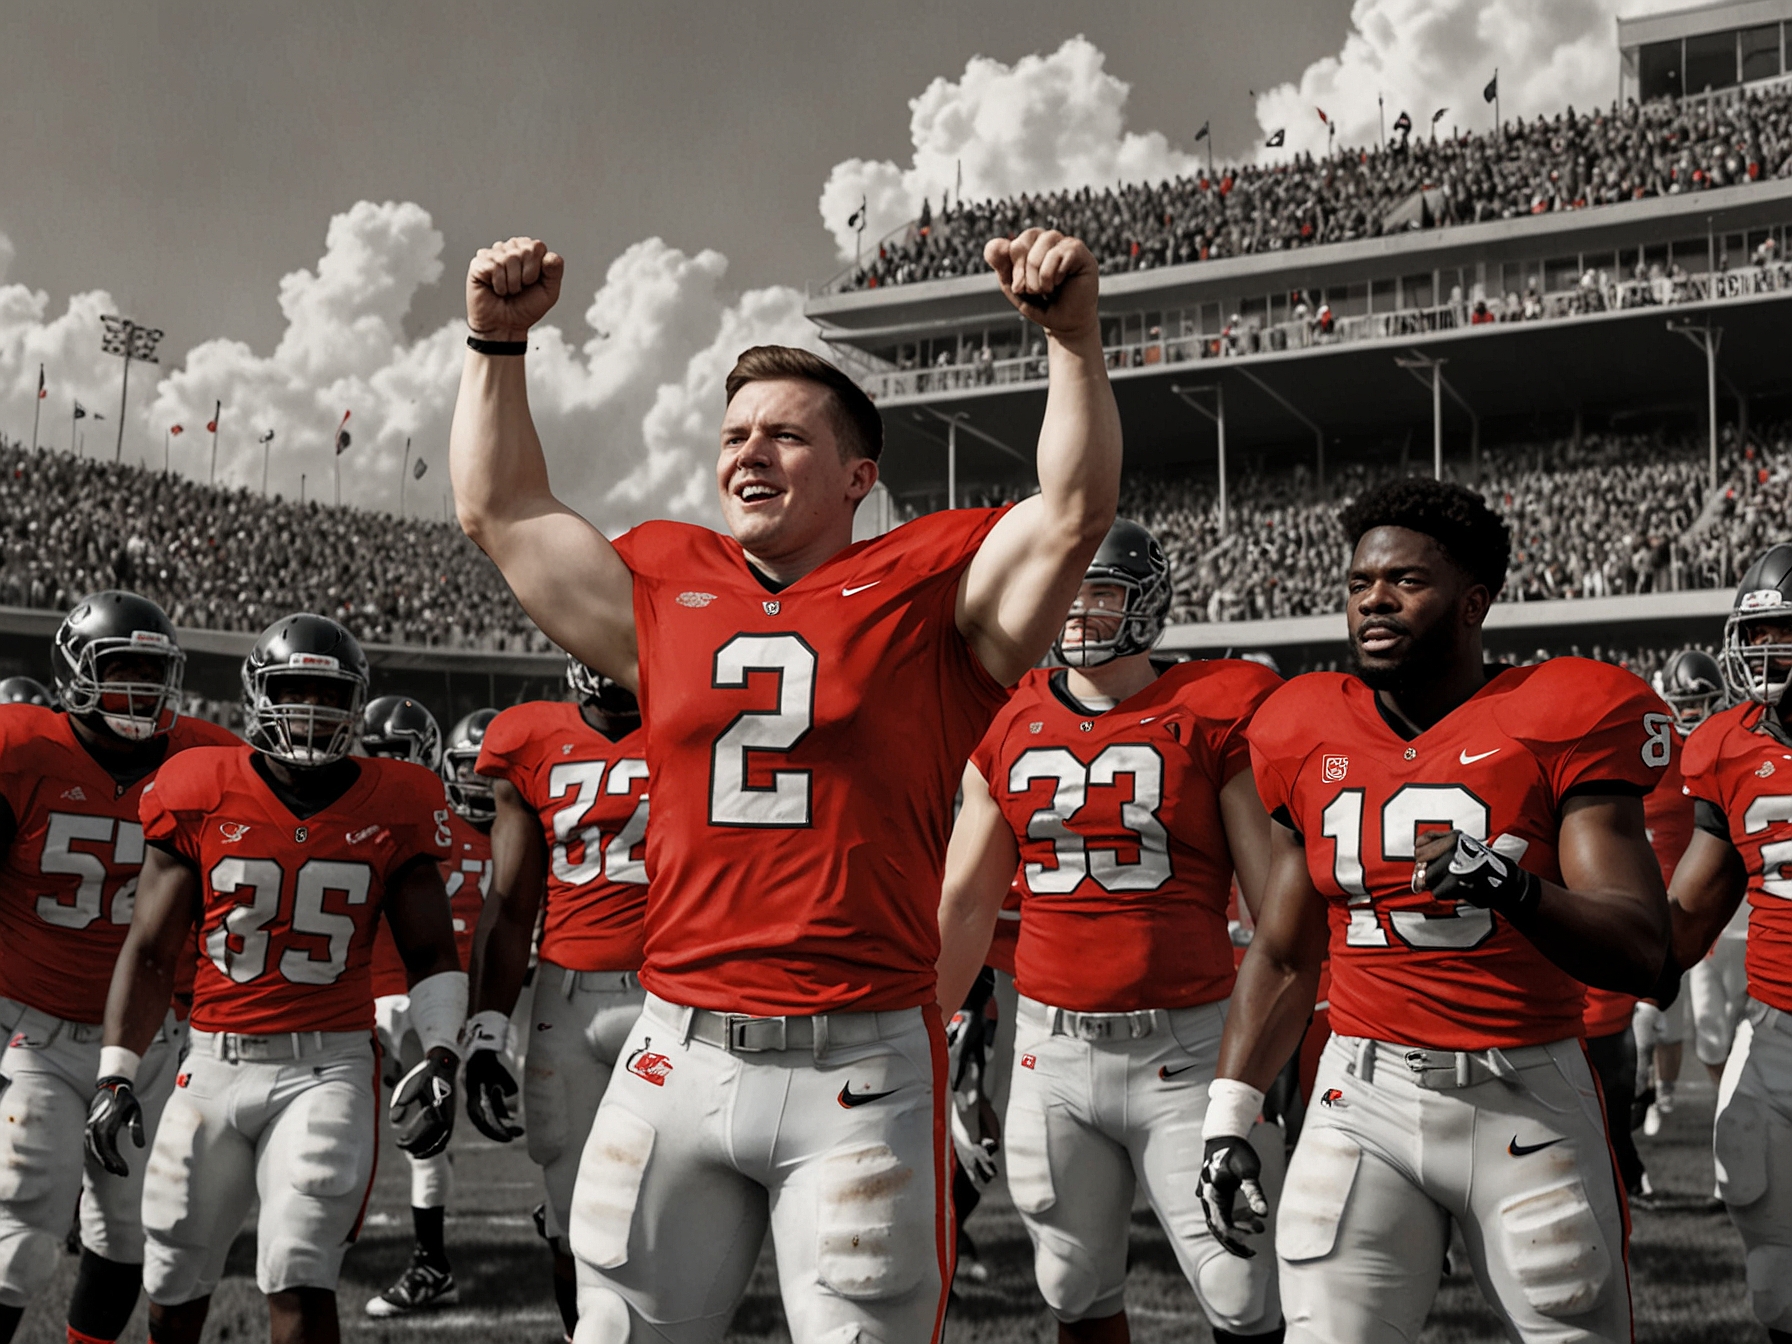 Charlie Condon standing with his teammates, celebrating a victory, illustrating his leadership and team-first mentality that have inspired and elevated the University of Georgia Bulldogs.